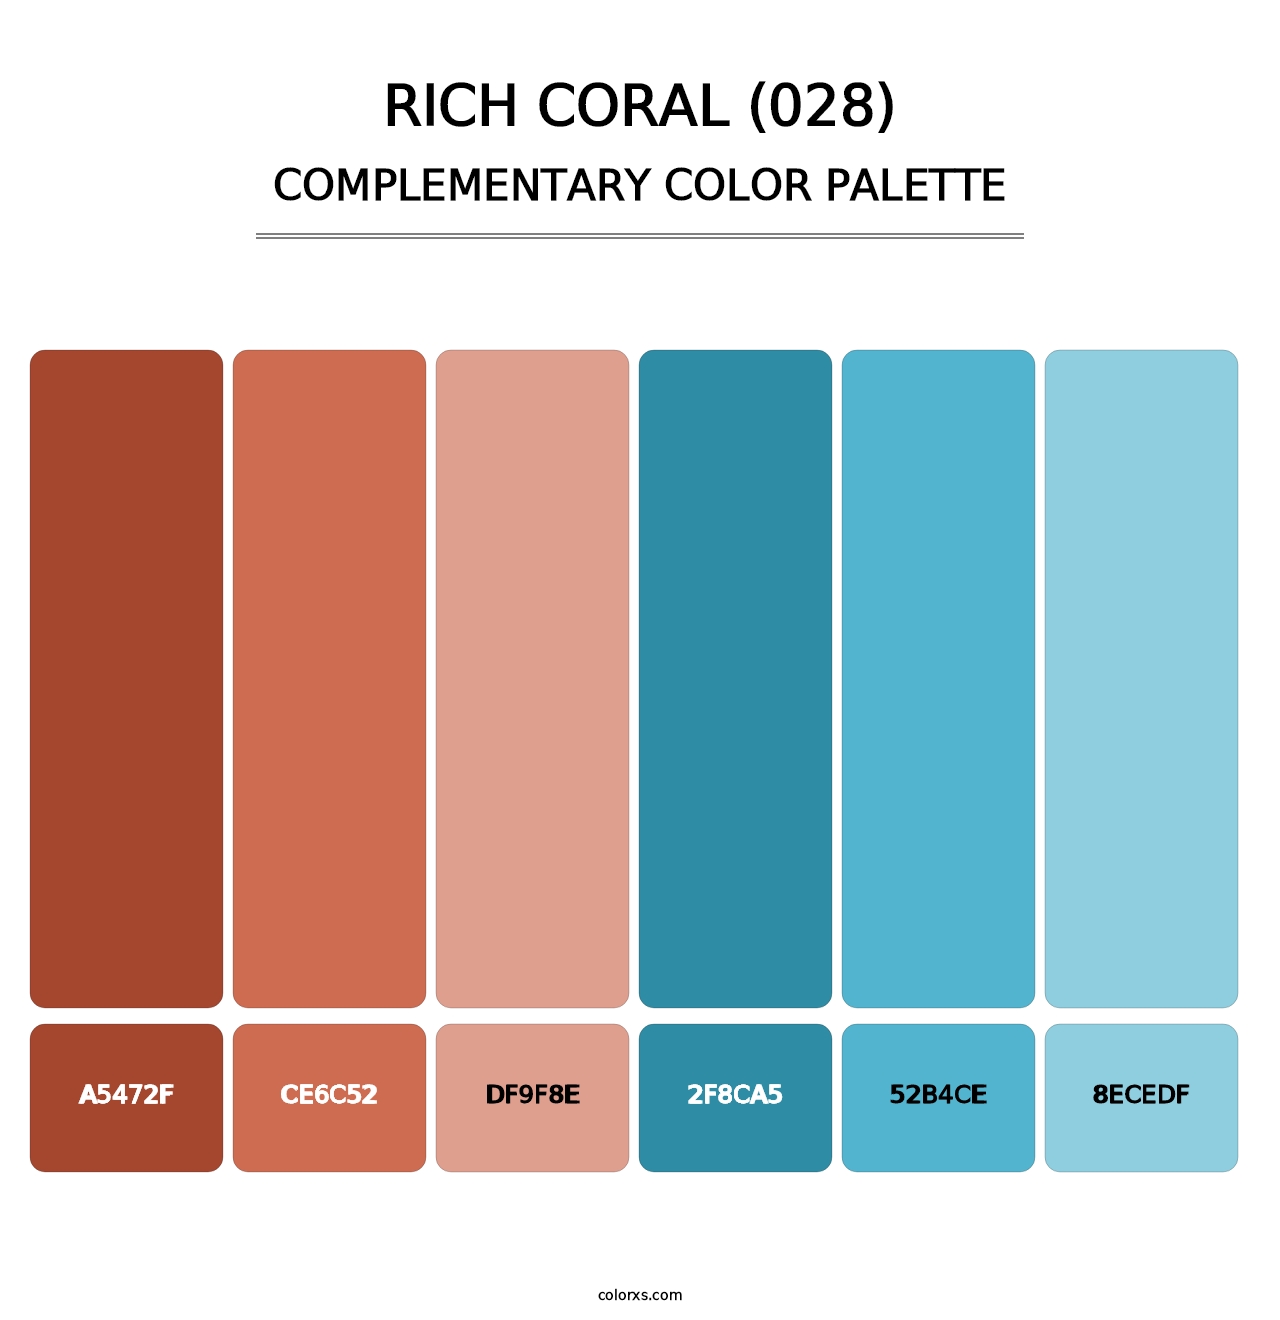 Rich Coral (028) - Complementary Color Palette